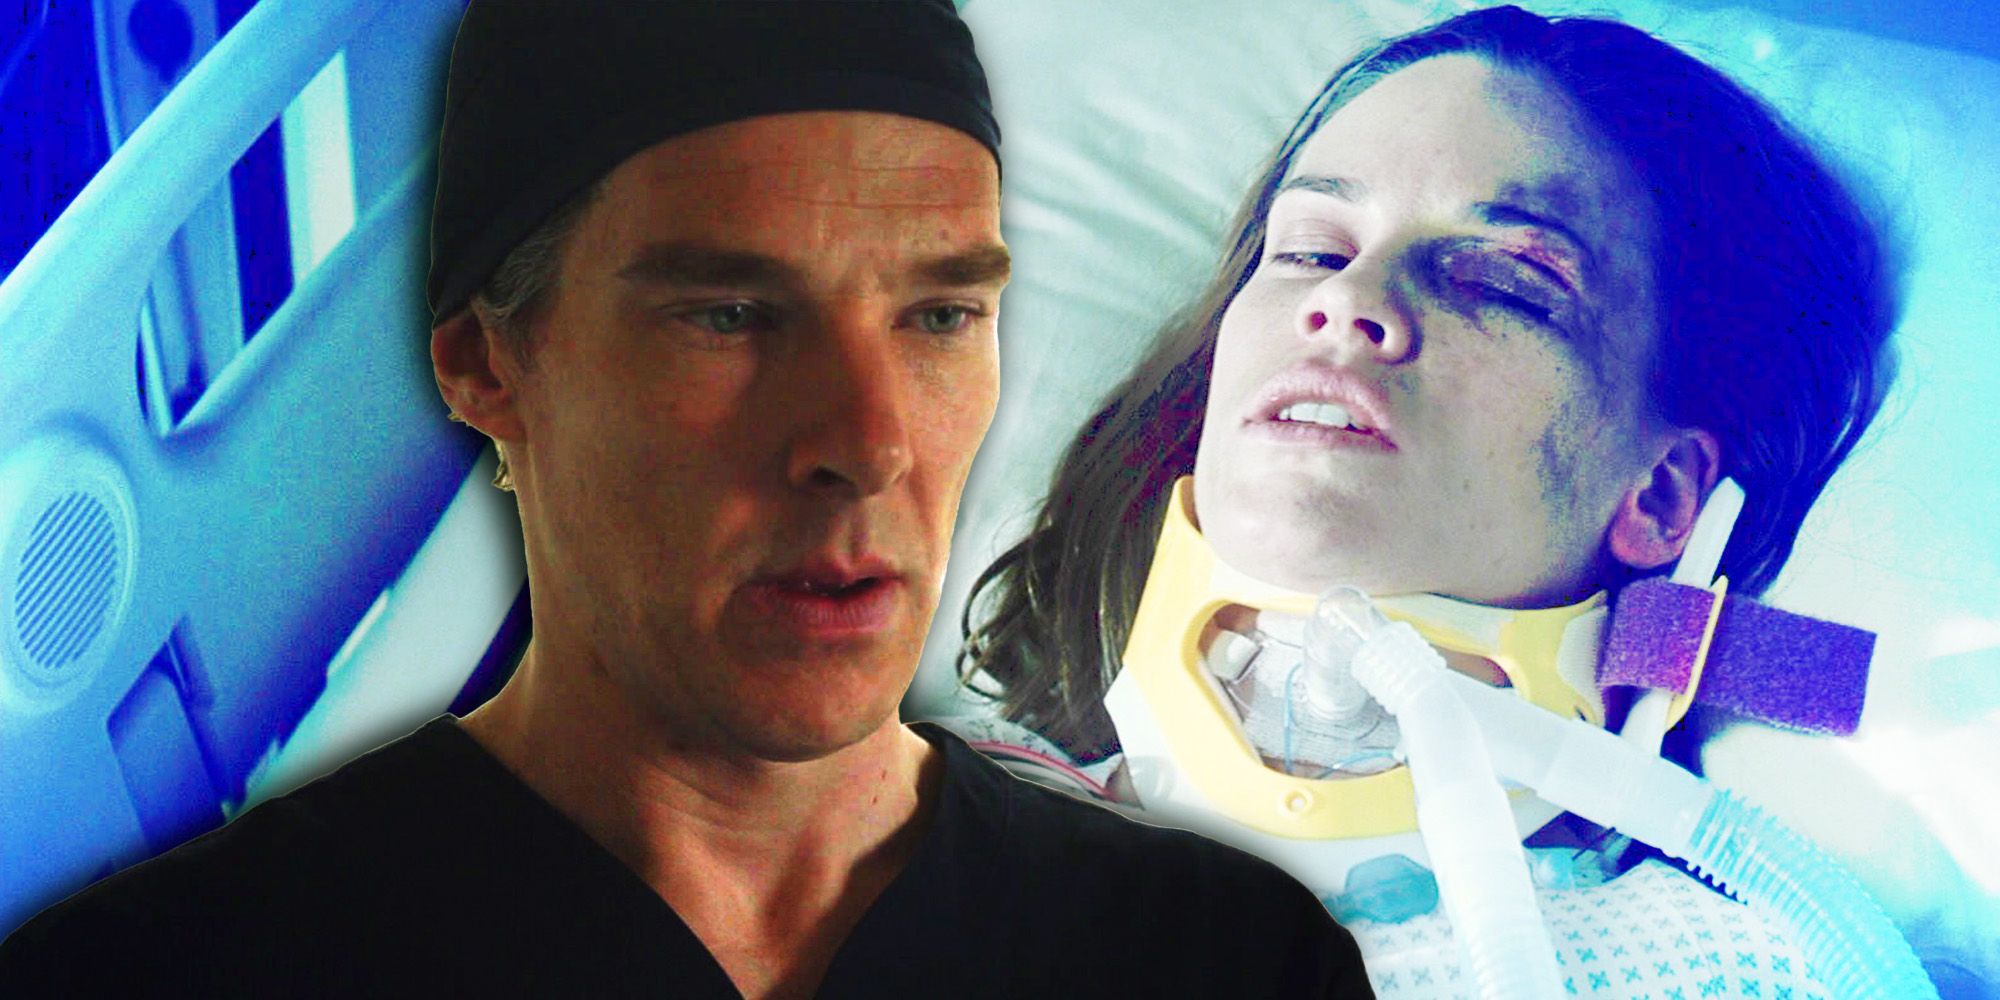 Stephen Strange (as a doctor) and Maggie in Million Dollar Baby